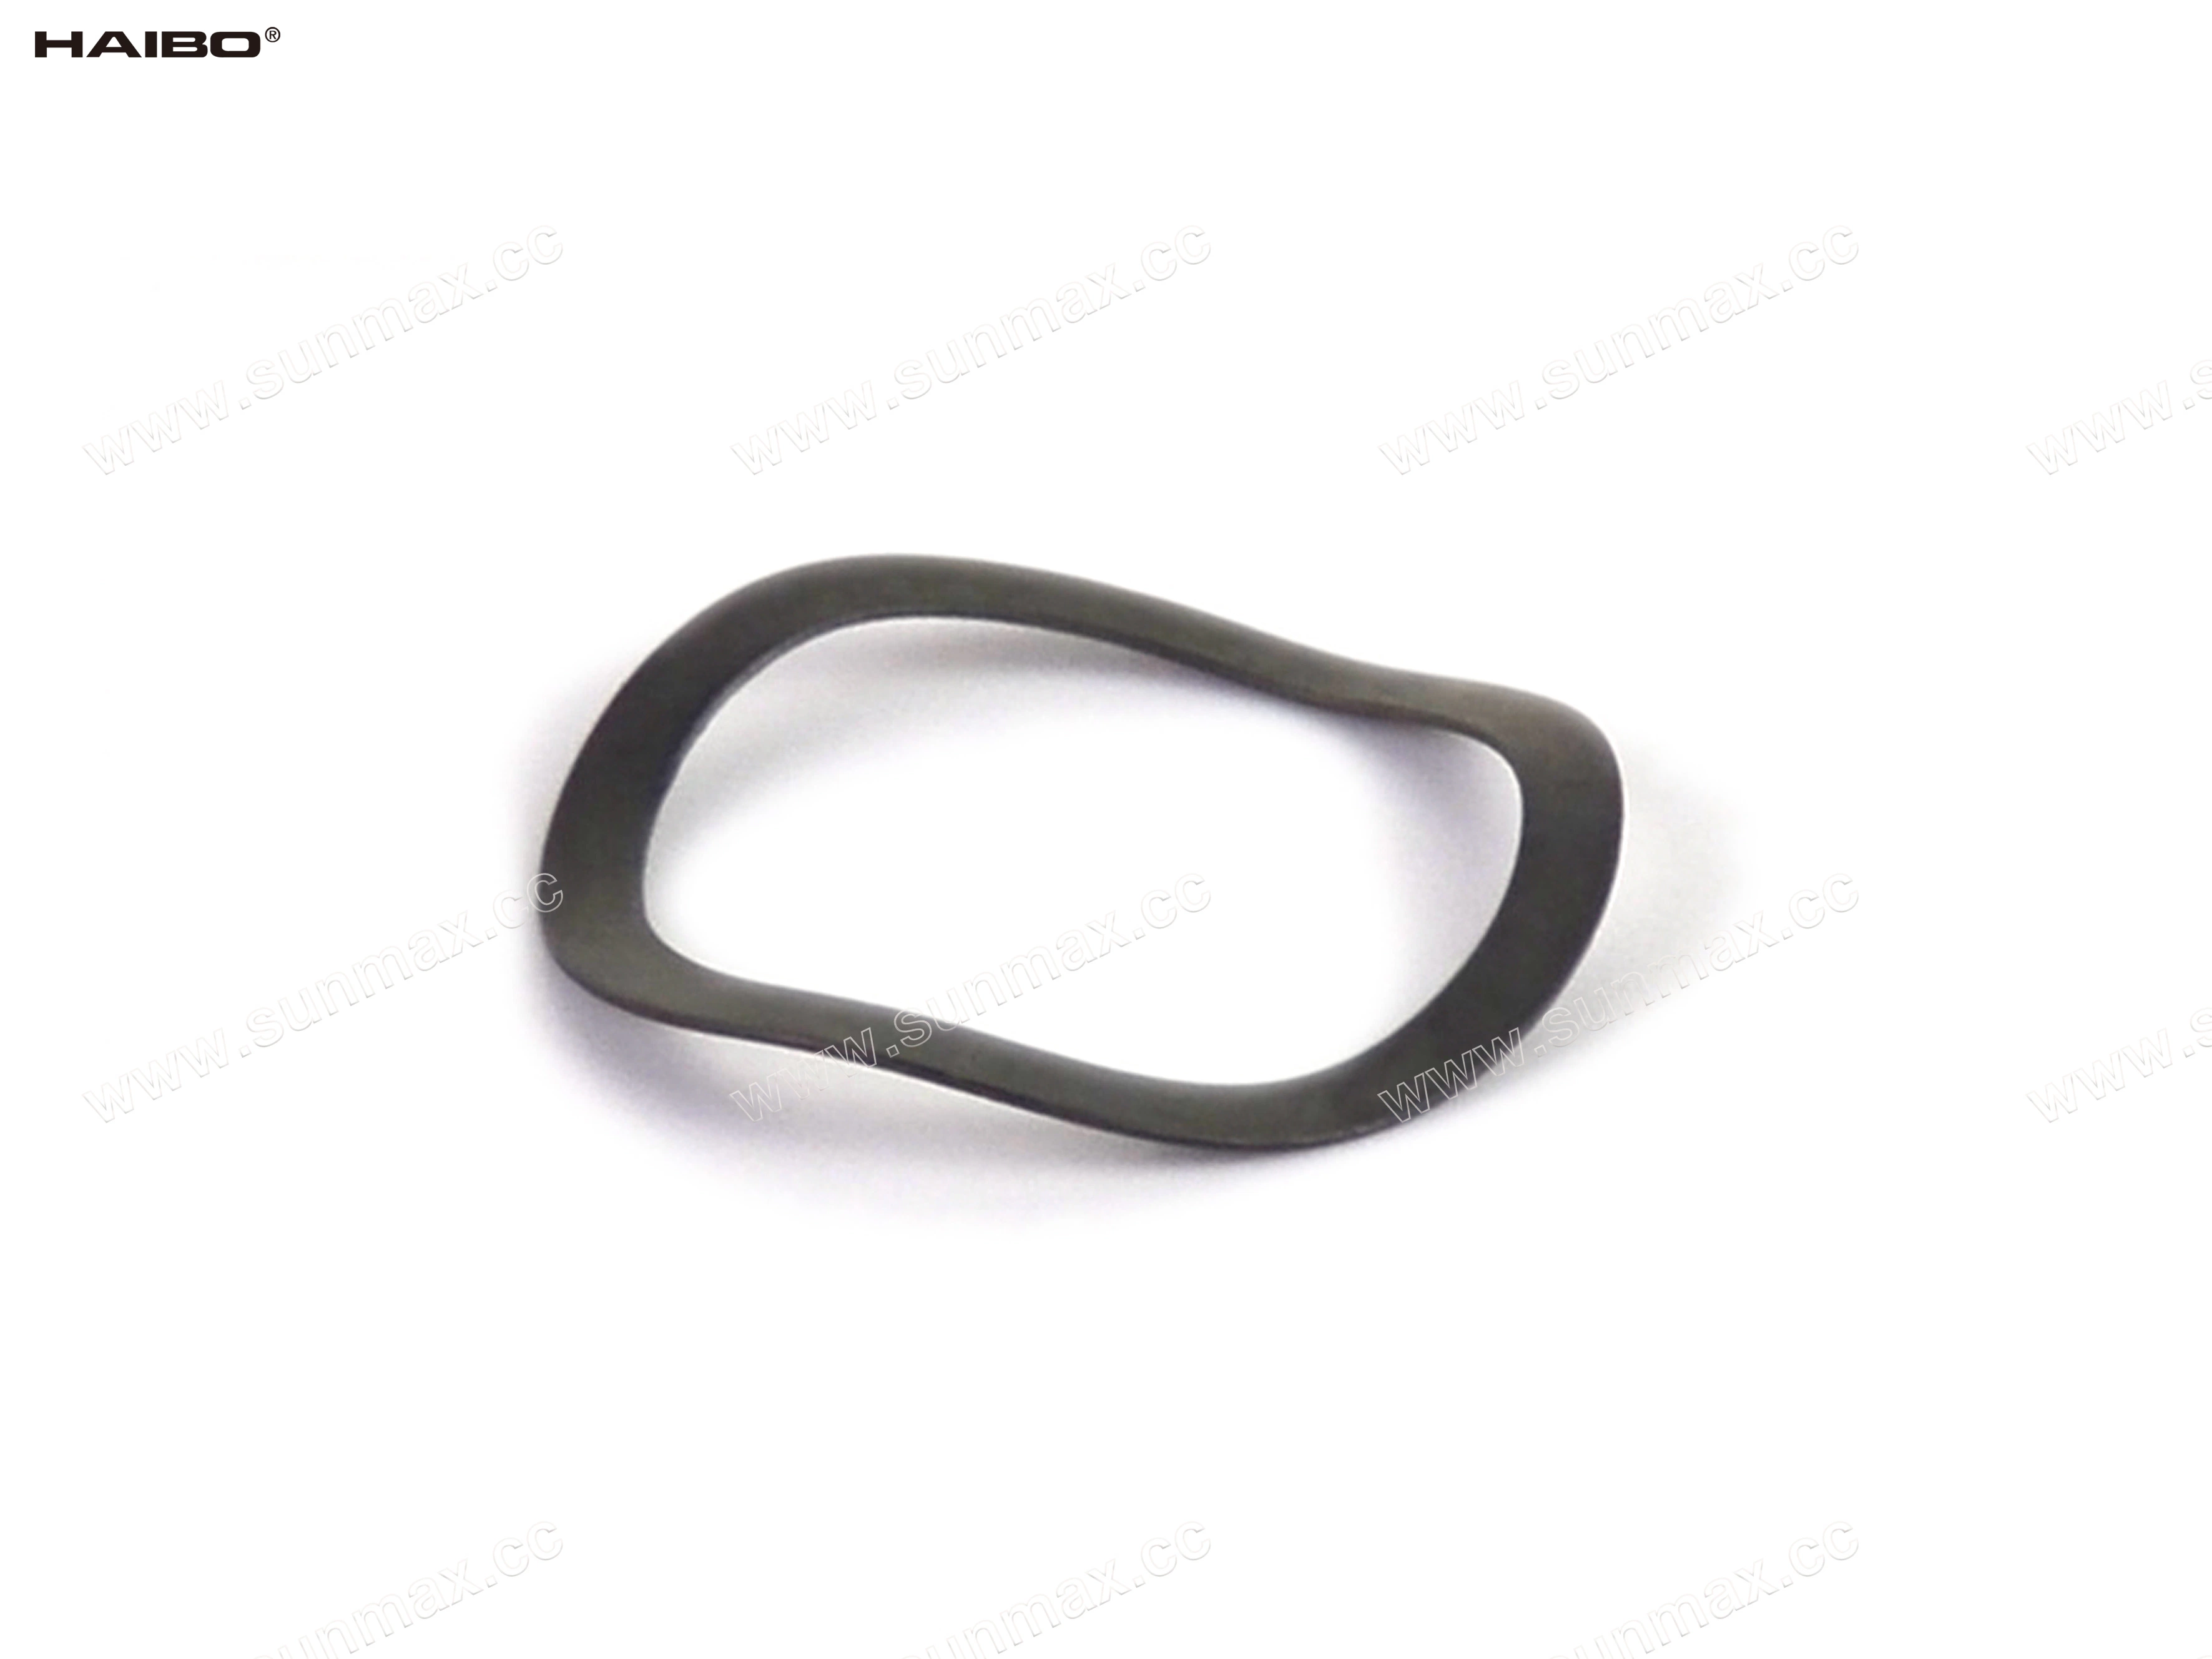 Corrugated Elastic Washer Spare Parts for Haibo M150 Electric Trolling Motor